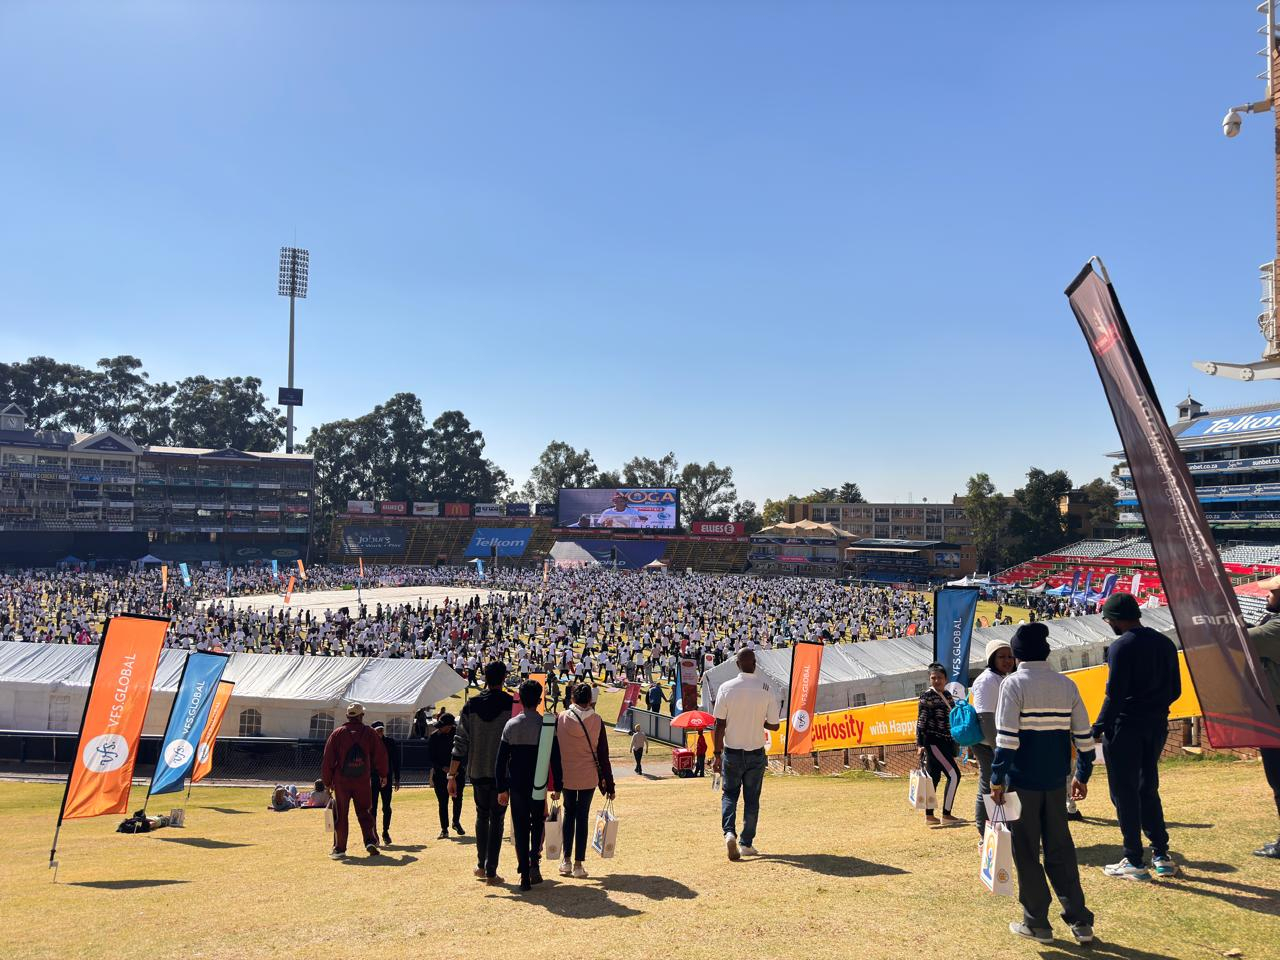 Historic gathering at Wanderers Stadium marks grand IDY celebrations in South Africa [Video]